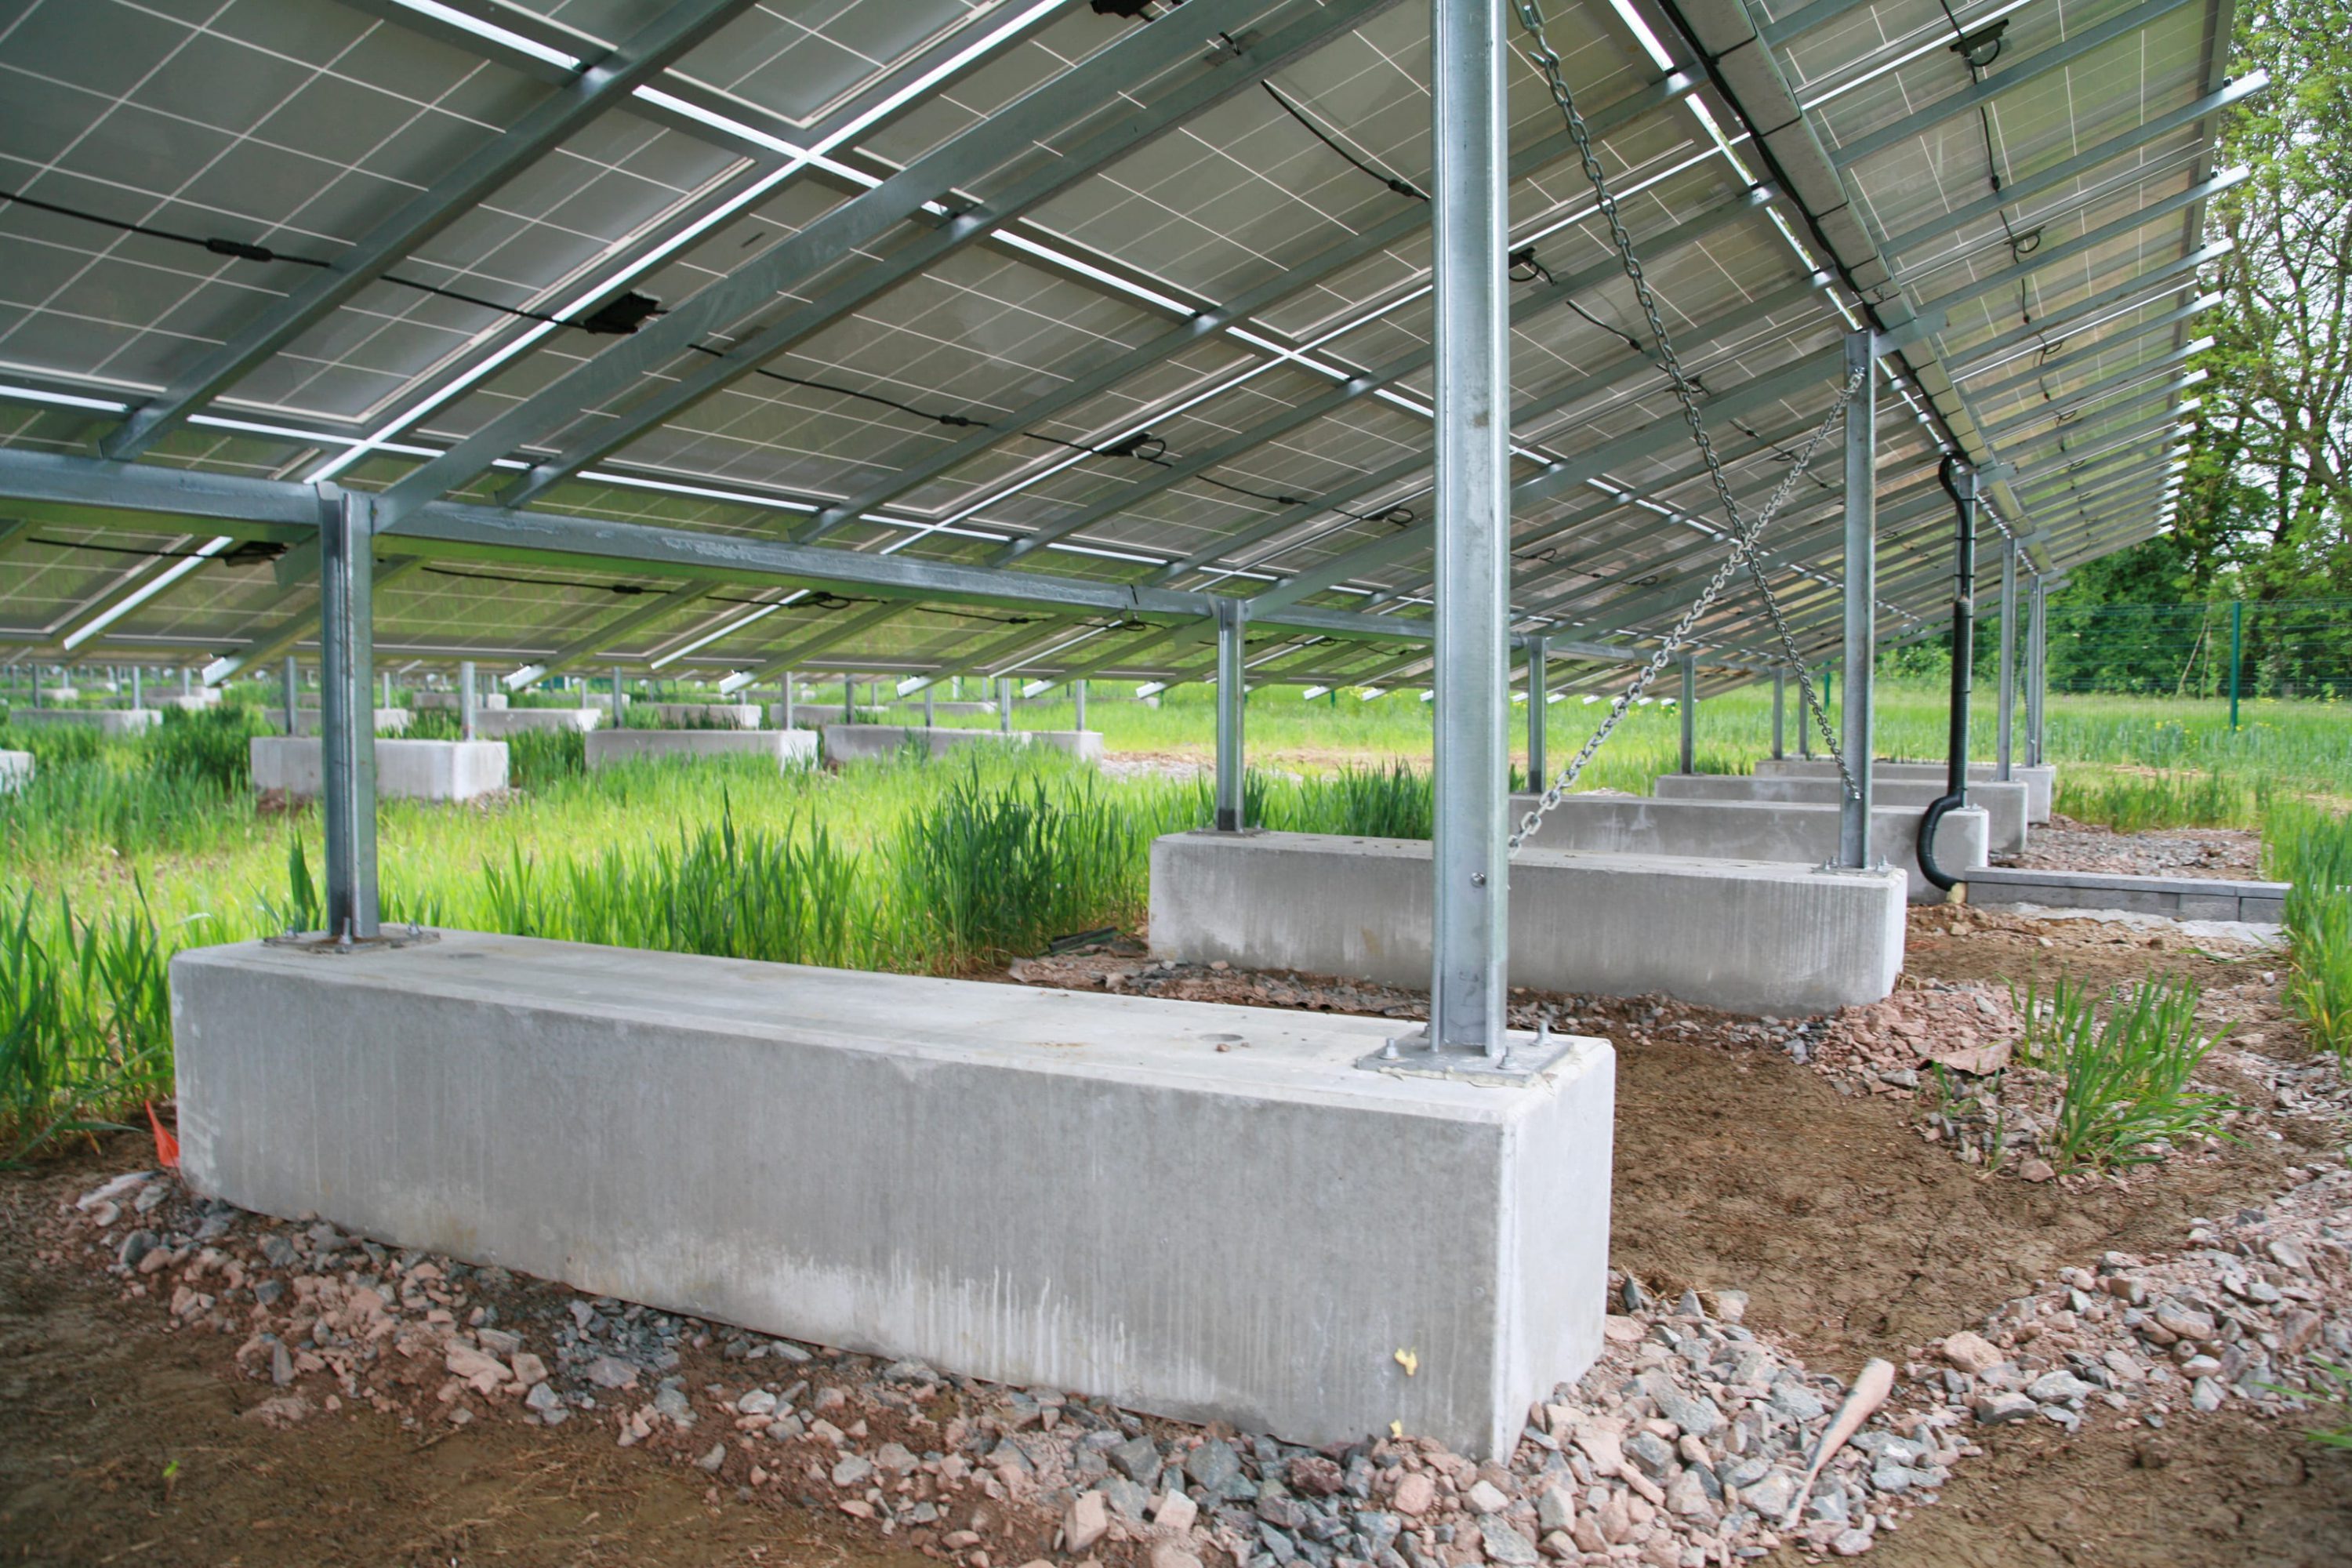 Bespoke Concrete bases used to support Solar Panels